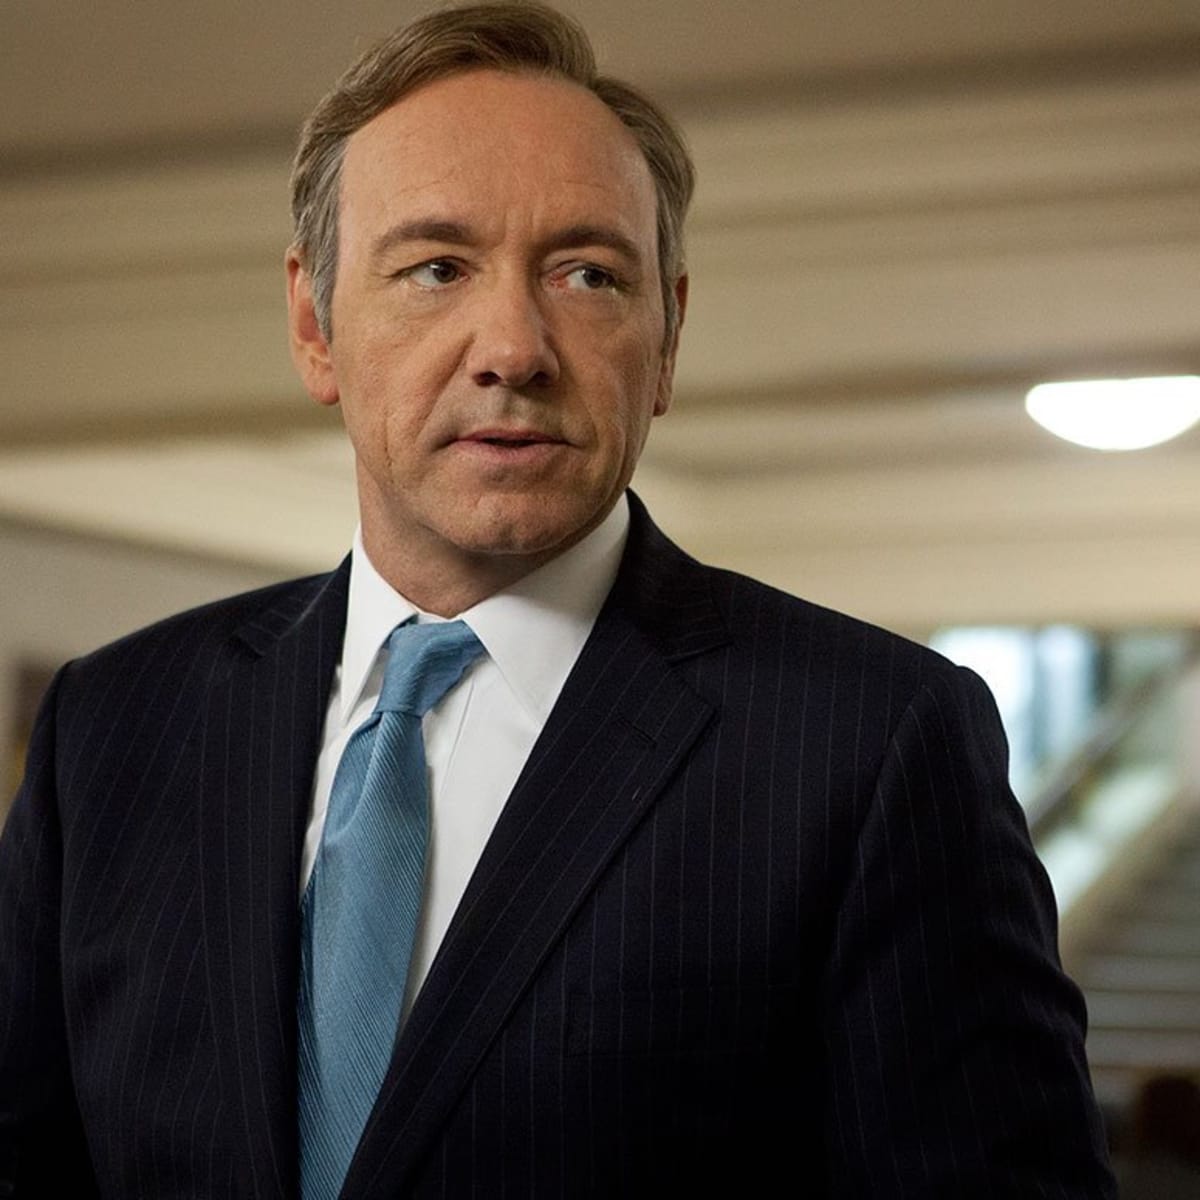 Kevin Spacey as Francis Underwood in House Of Cards